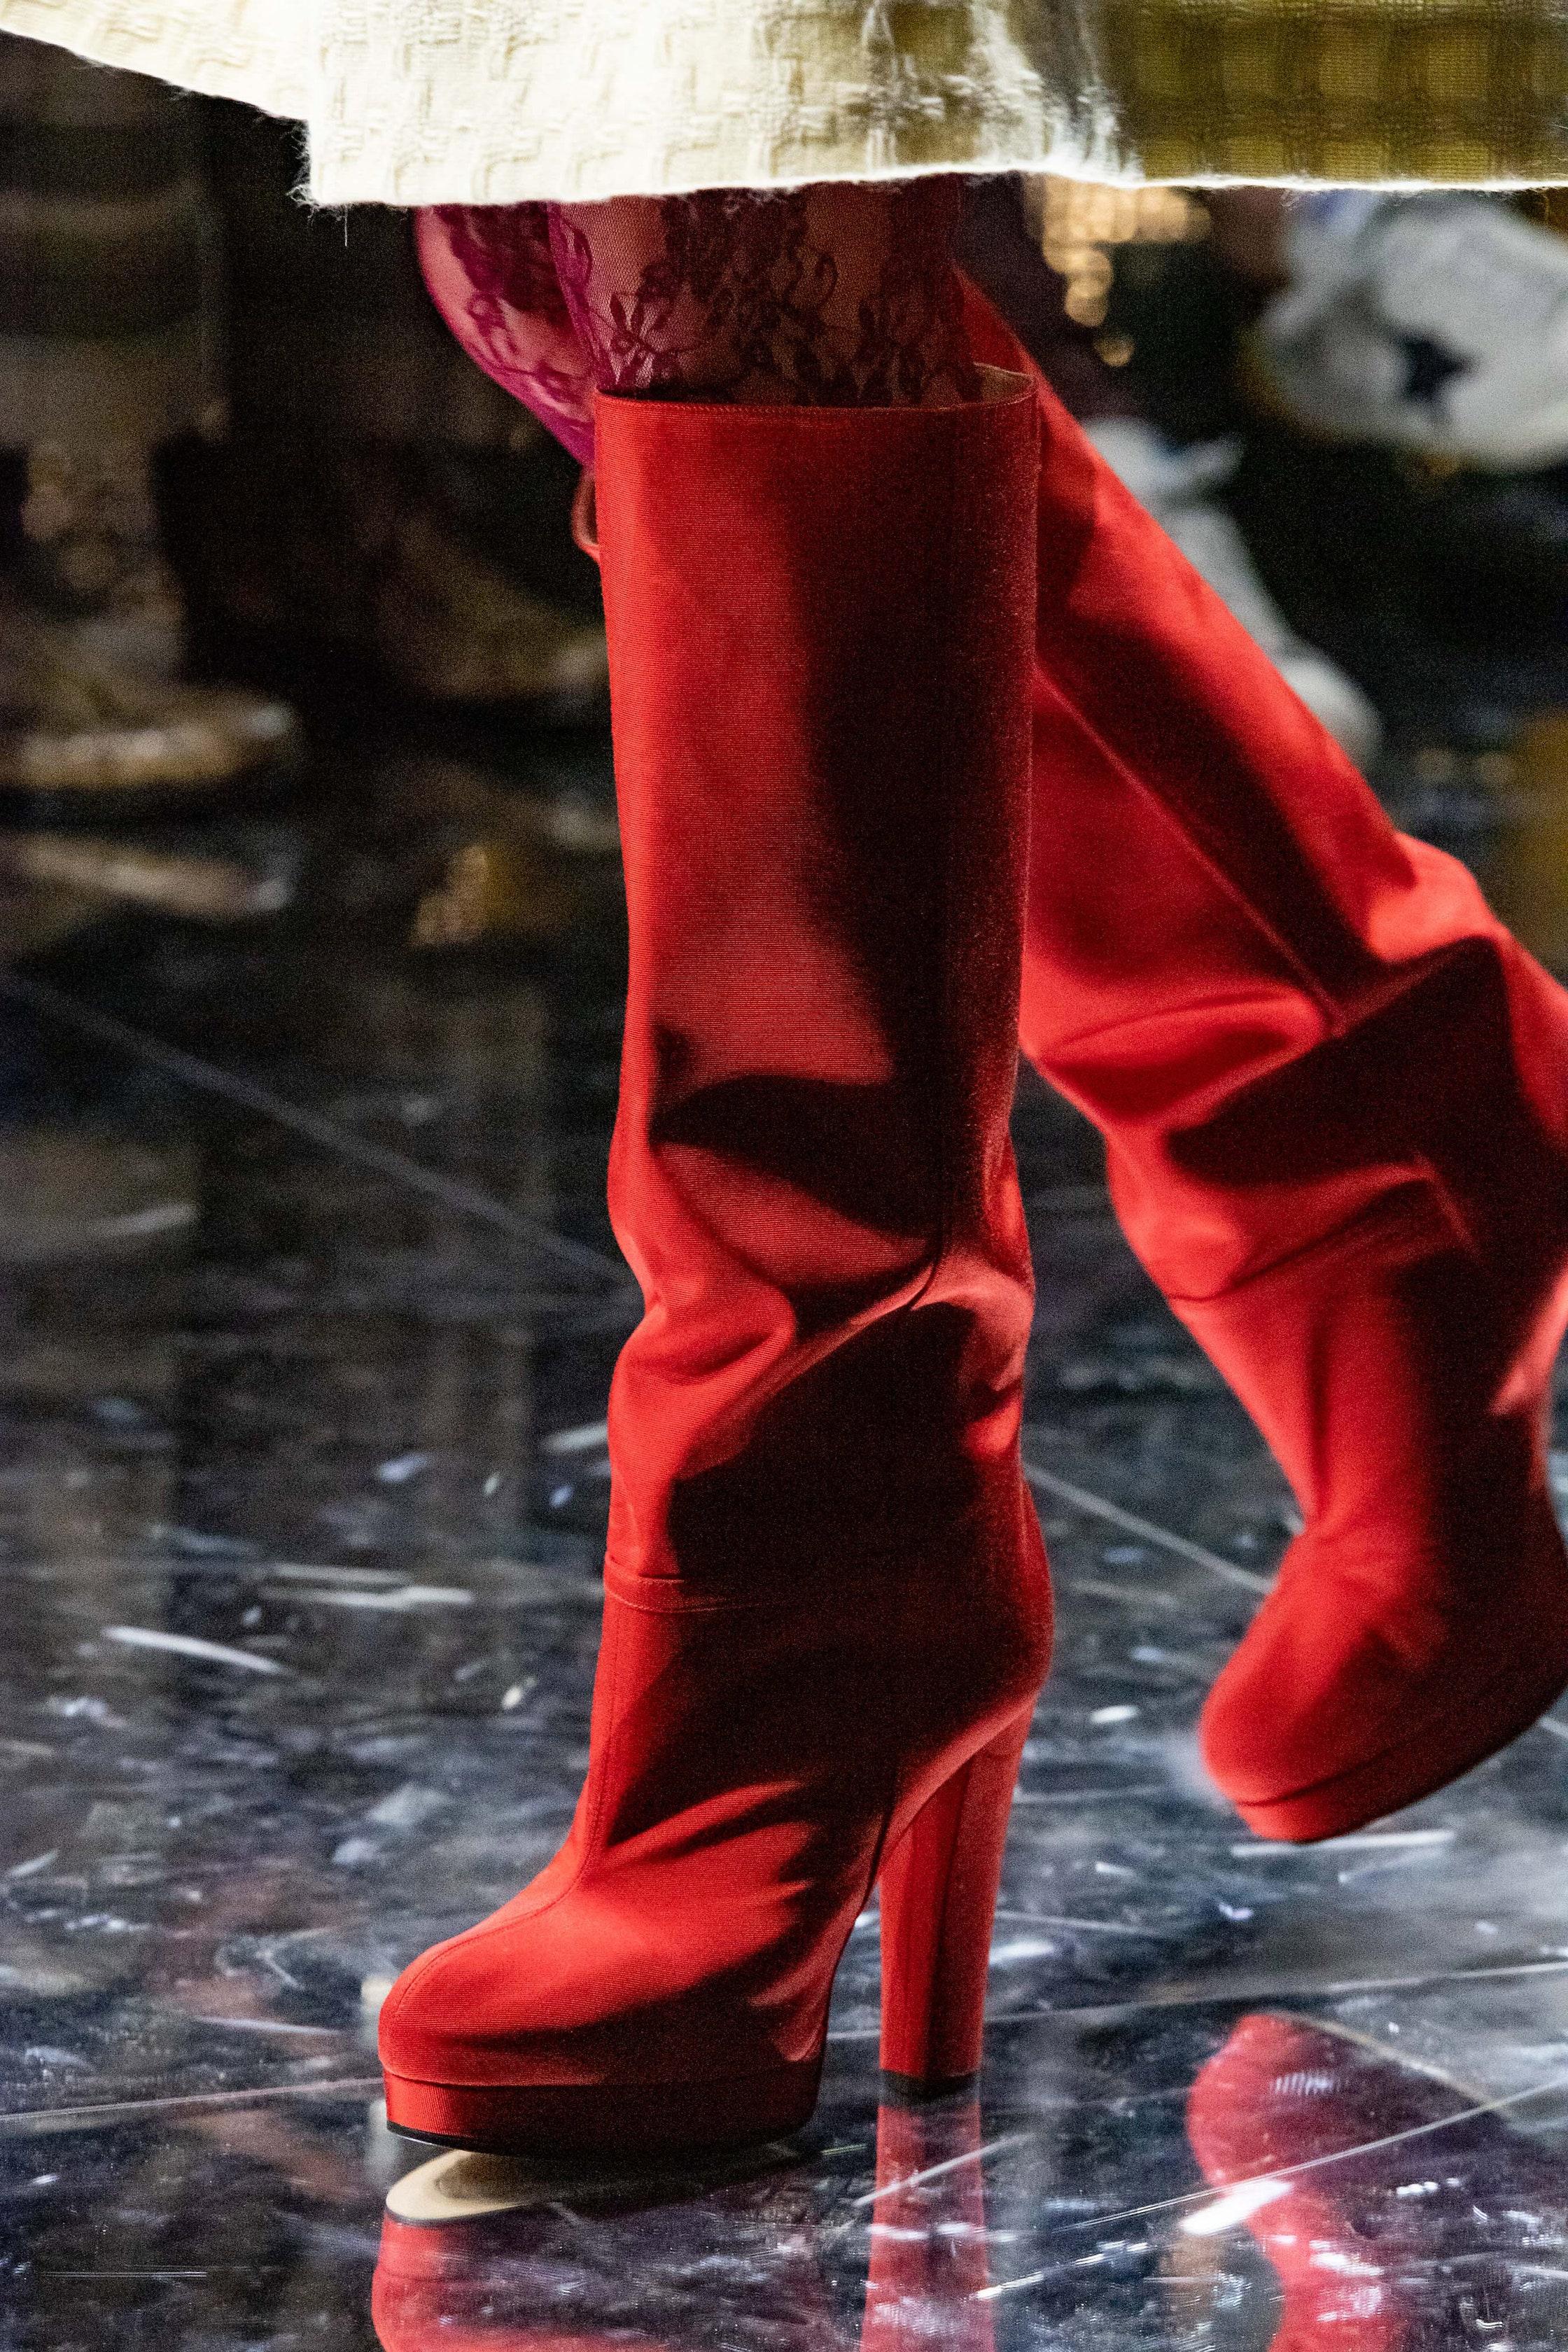 New With Box Gucci Fall 2019 Alessandro Michele Red Boots Sz 38 en vente 10